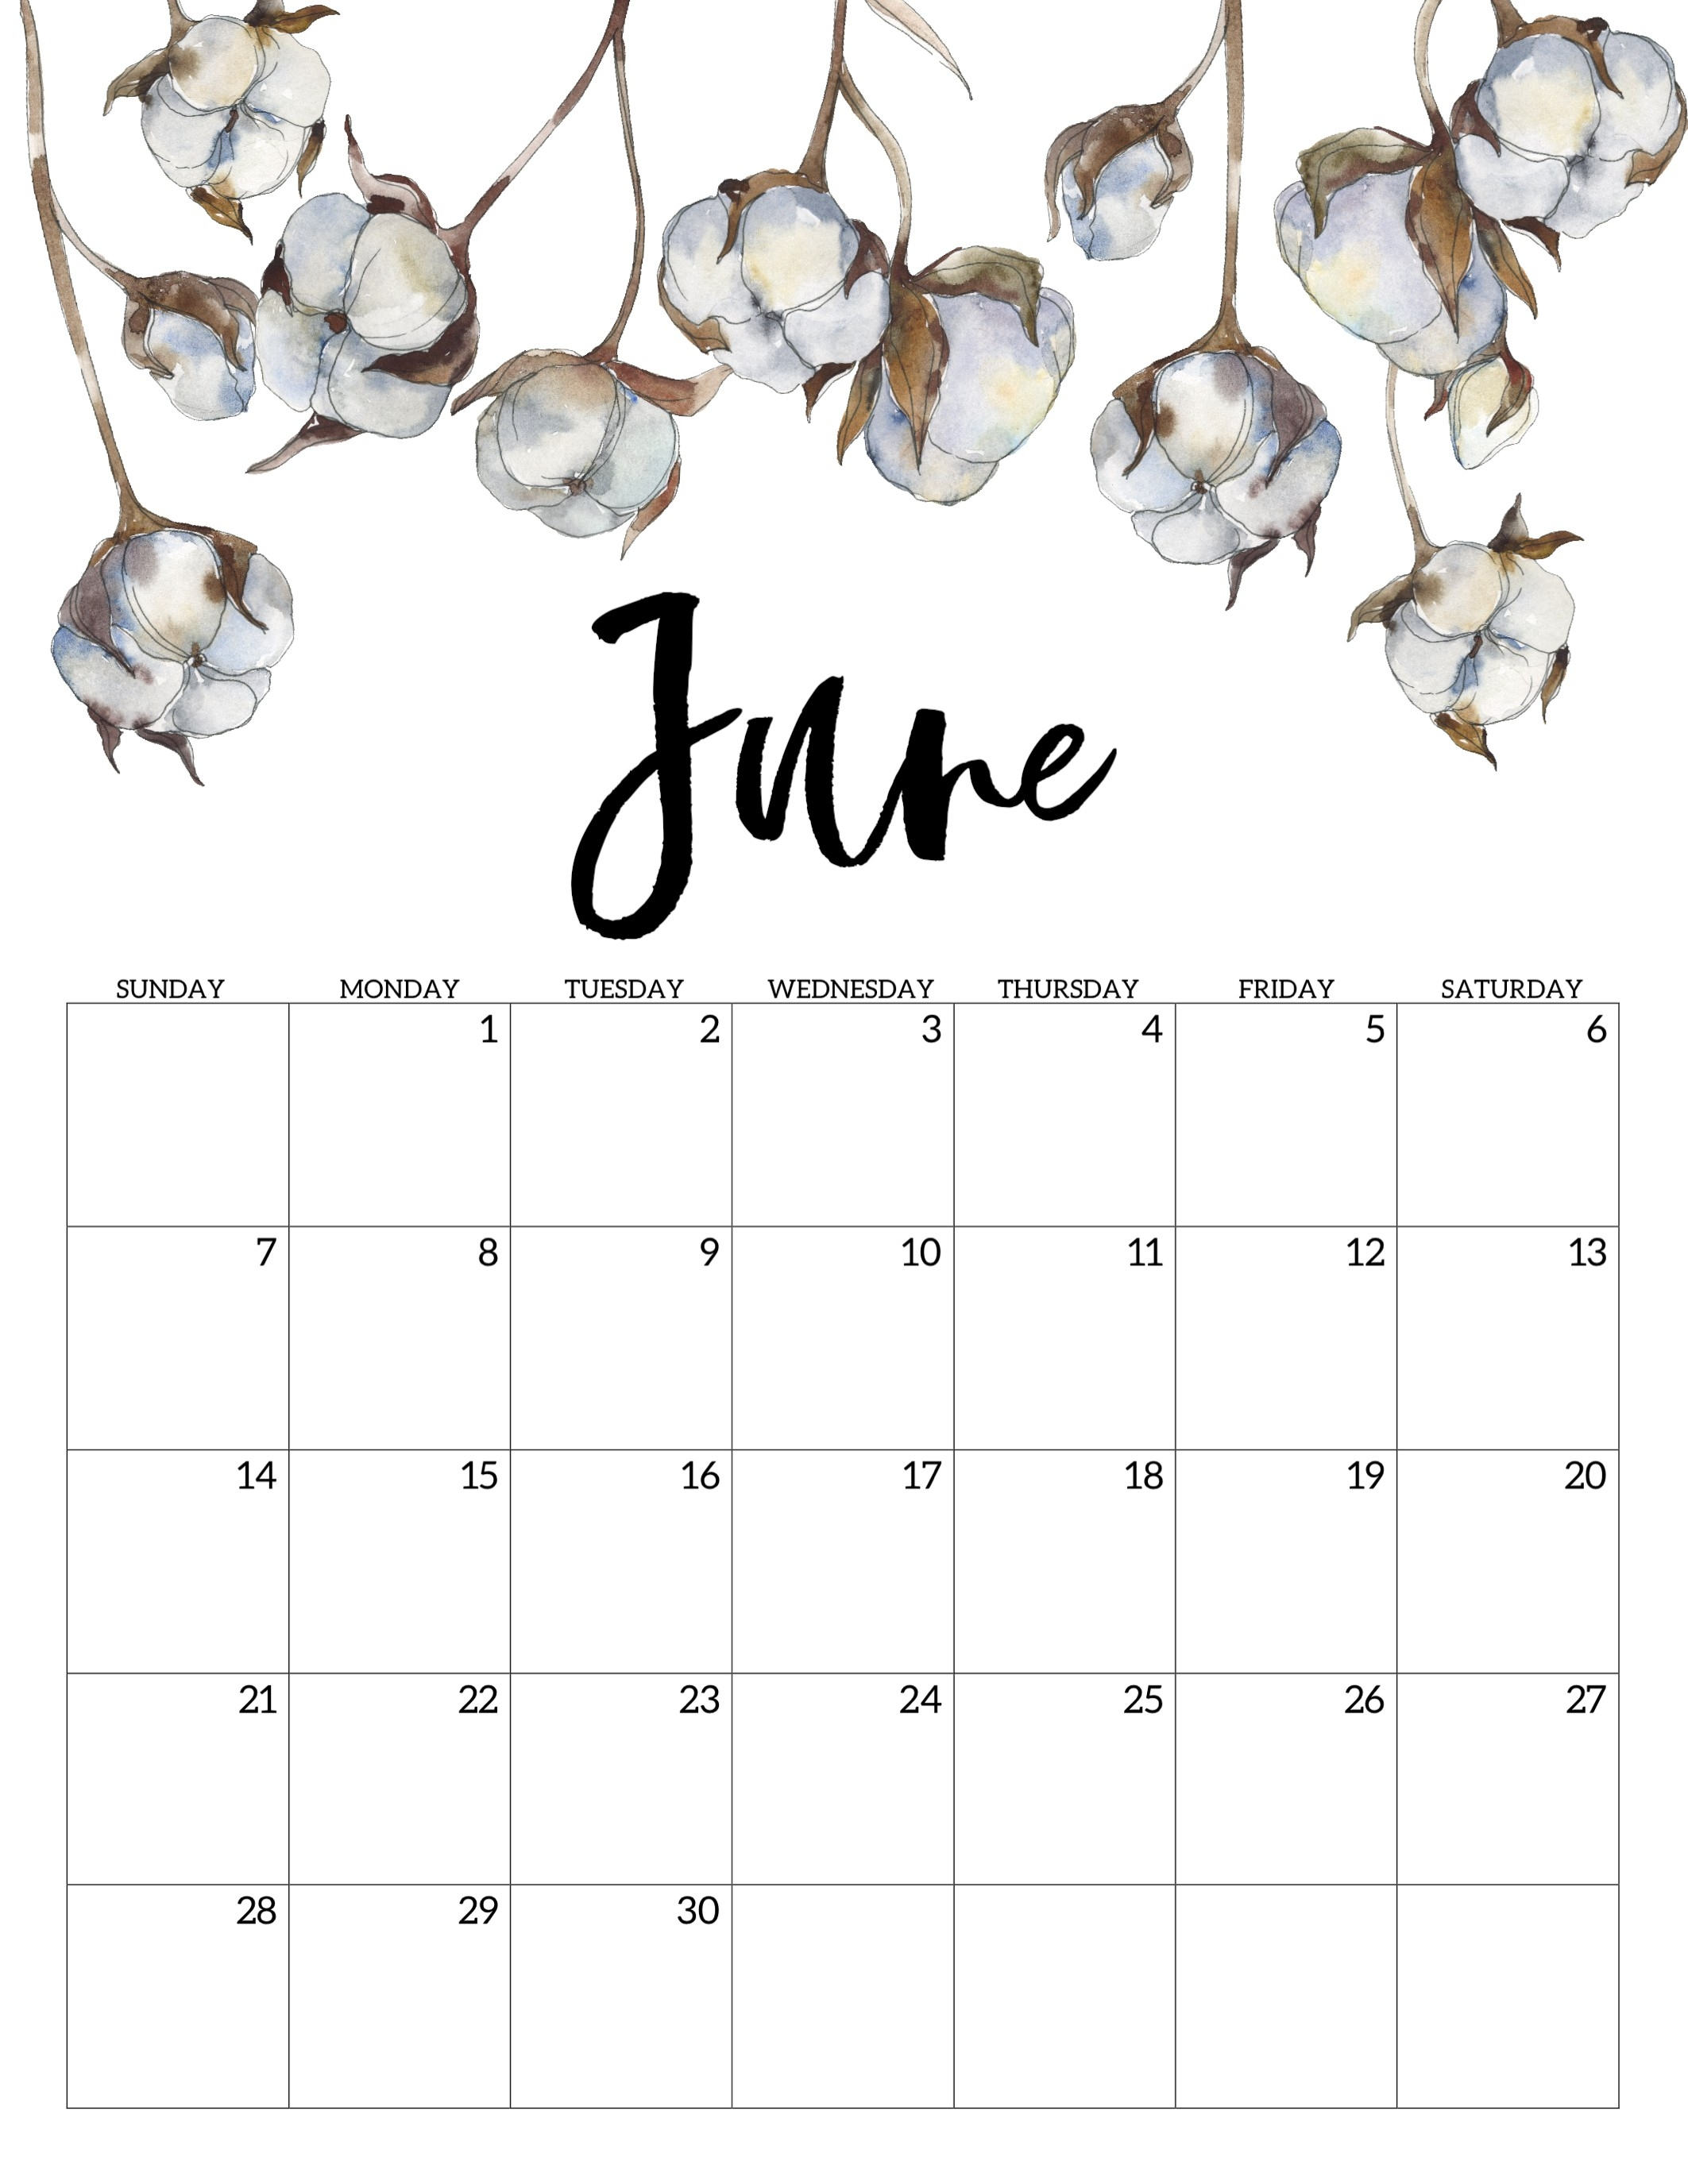 Printable Monthly Calendar July 2019 To June 2020 – July with Printable June 2020 Calendar